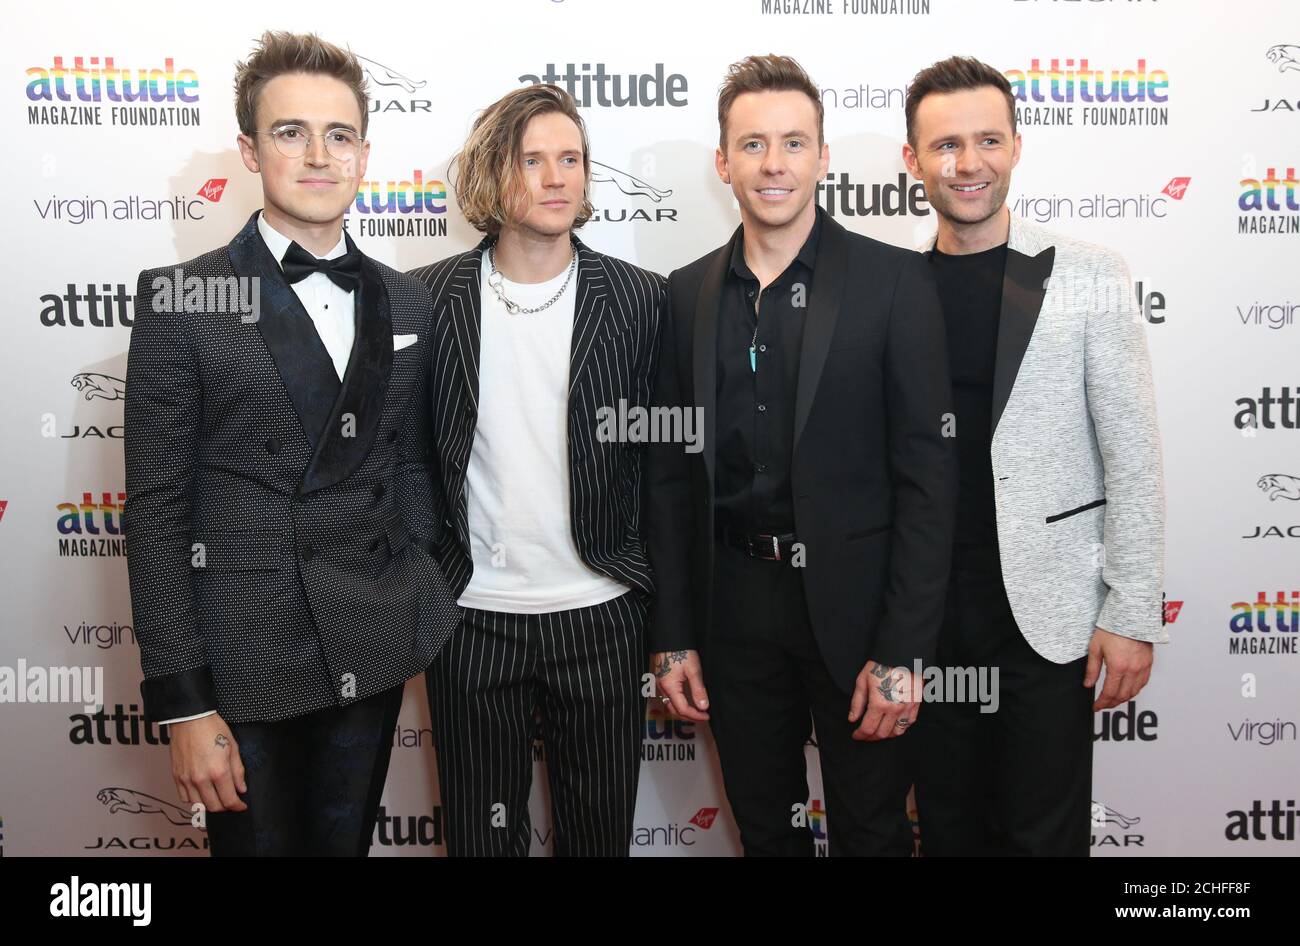 EDITORIAL USE ONLY McFly (left to right) Tom Fletcher, Dougie Poynter, Danny Jones and Harry Judd, attend the Virgin Atlantic Attitude Awards at the Roundhouse, London. PA Photo. Picture date: Wednesday October 9, 2019. Photo credit should read: Matt Alexander/PA Wire  Stock Photo